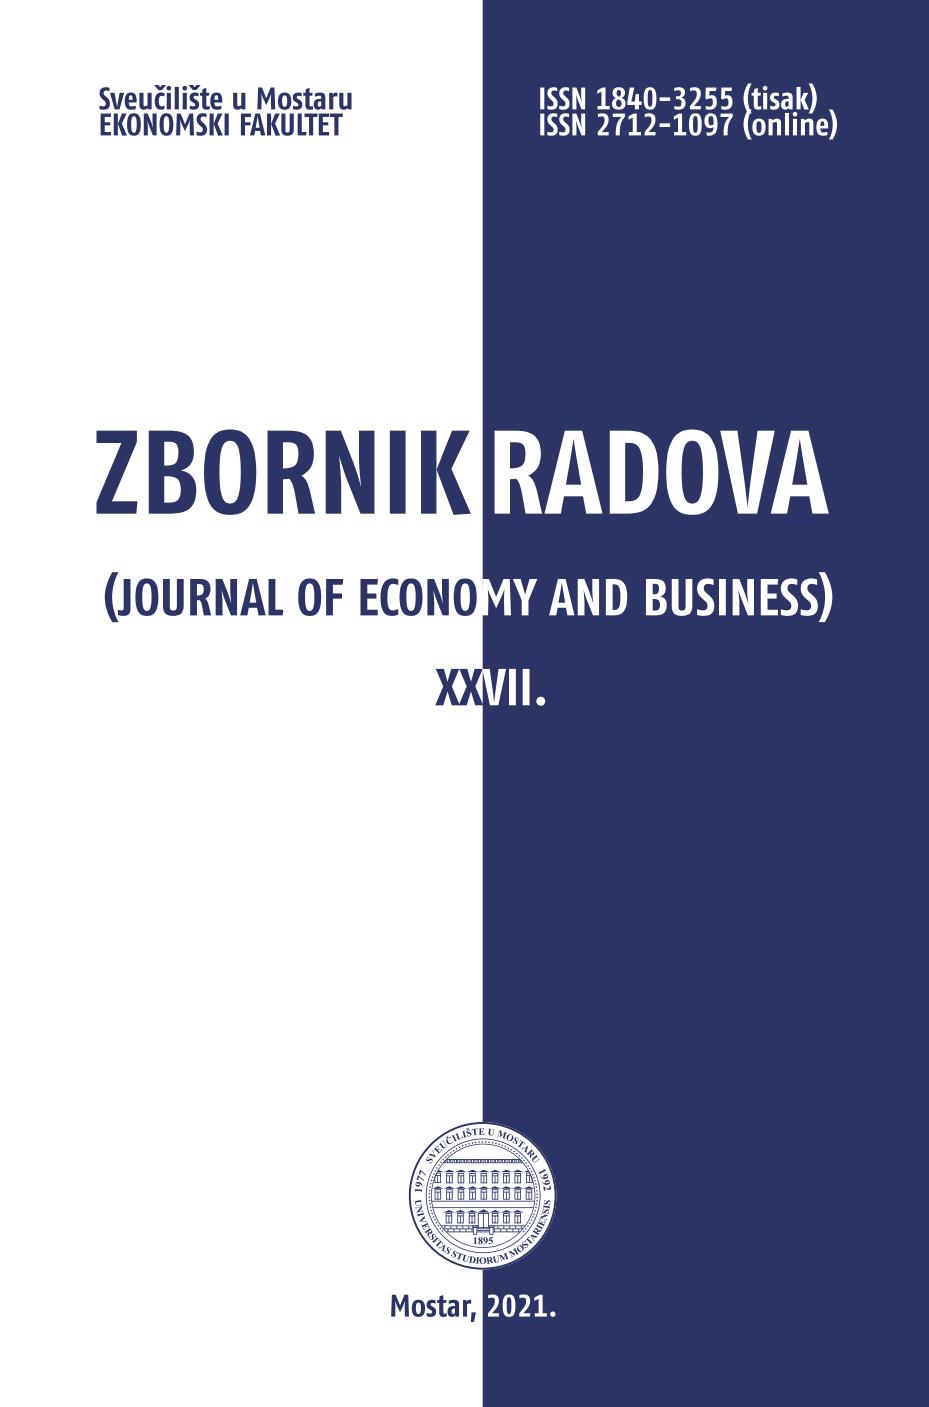 THE IMPACT OF SELECTED FINANCIAL RATIOS AND GROSS DOMESTIC PRODUCT ON THE PERFORMANCE OF ADVERTISING INDUSTRY – A CASE STUDY FROM CROATIA